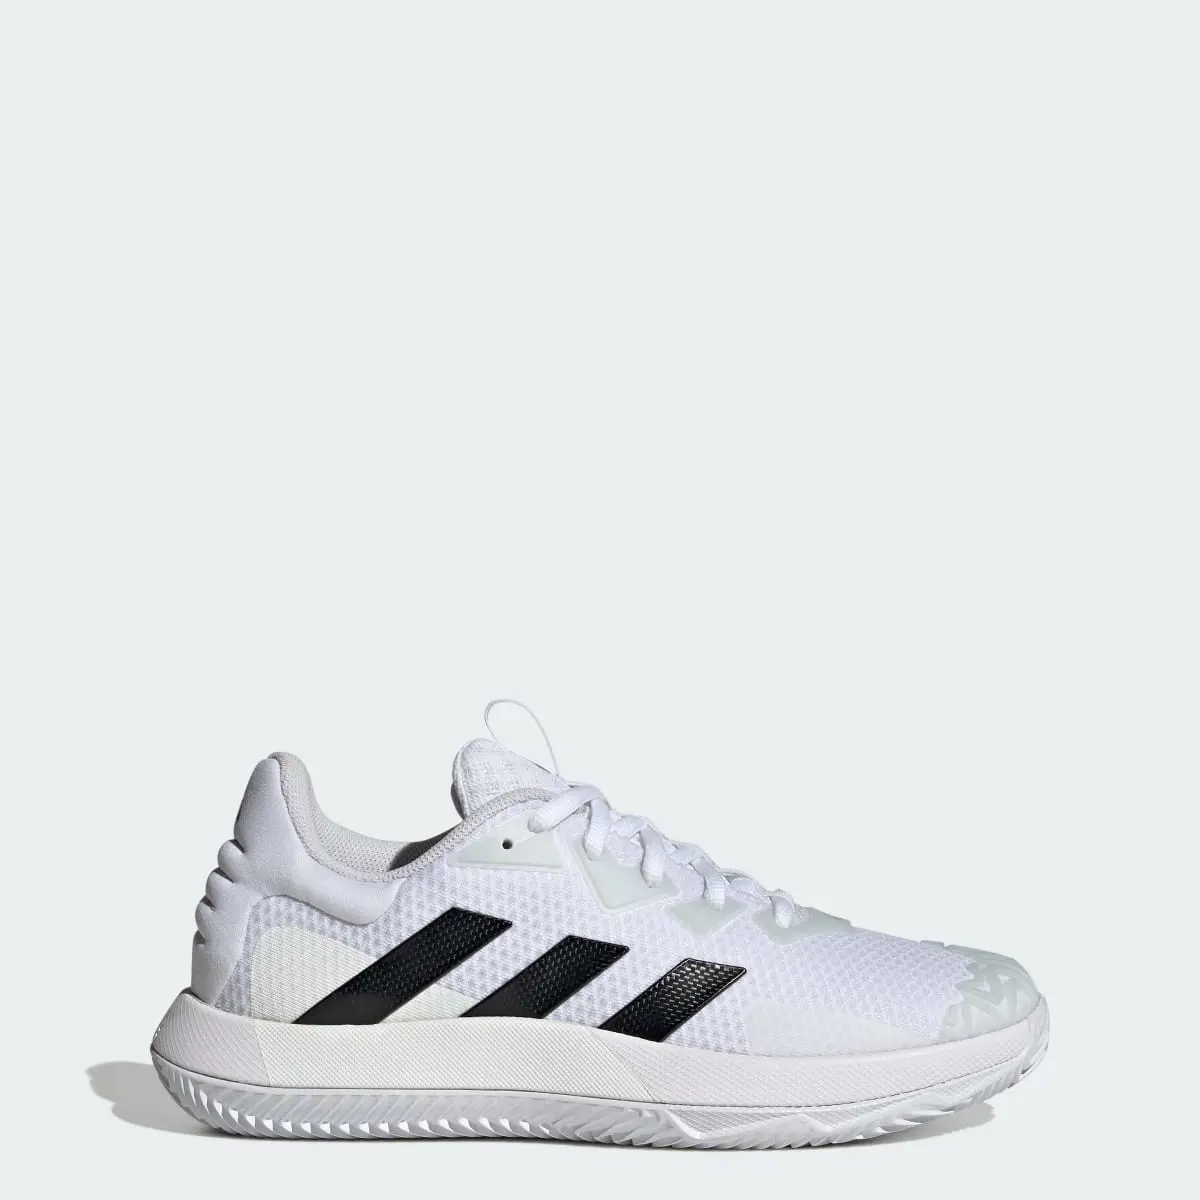 Adidas SoleMatch Control Clay Court Tennis Shoes. 1